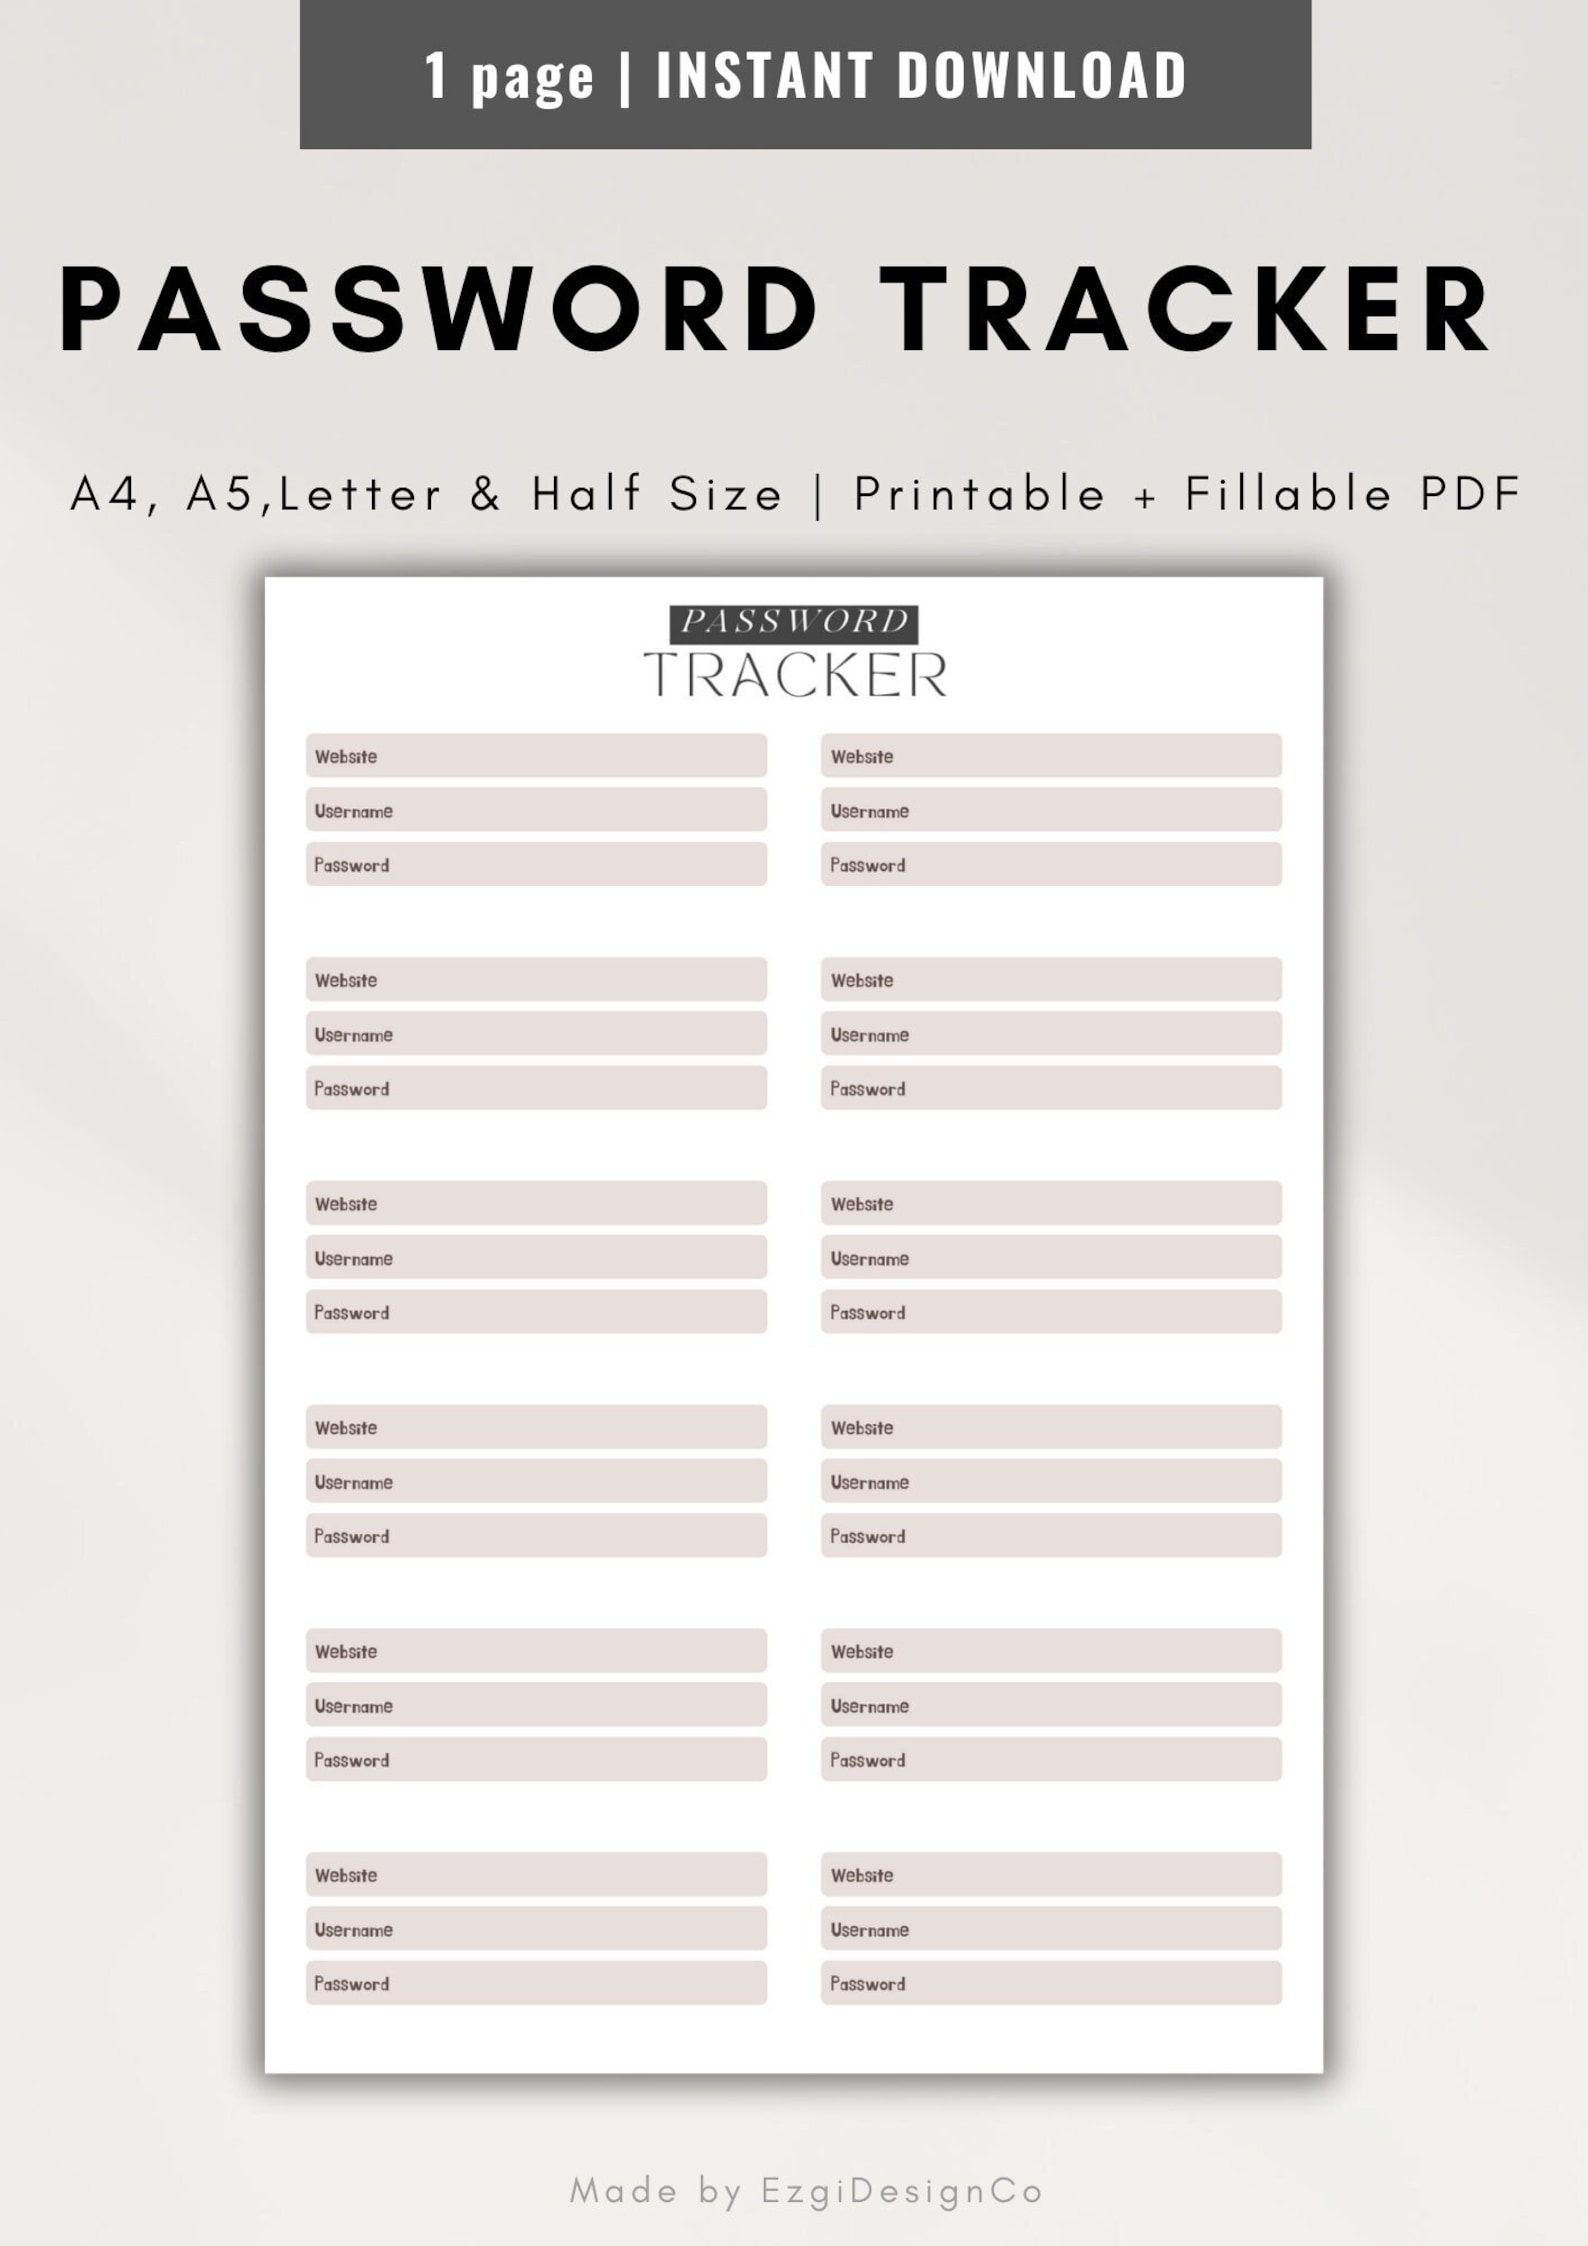 Password Tracker Printable & Fillable Password Keeper - Etsy